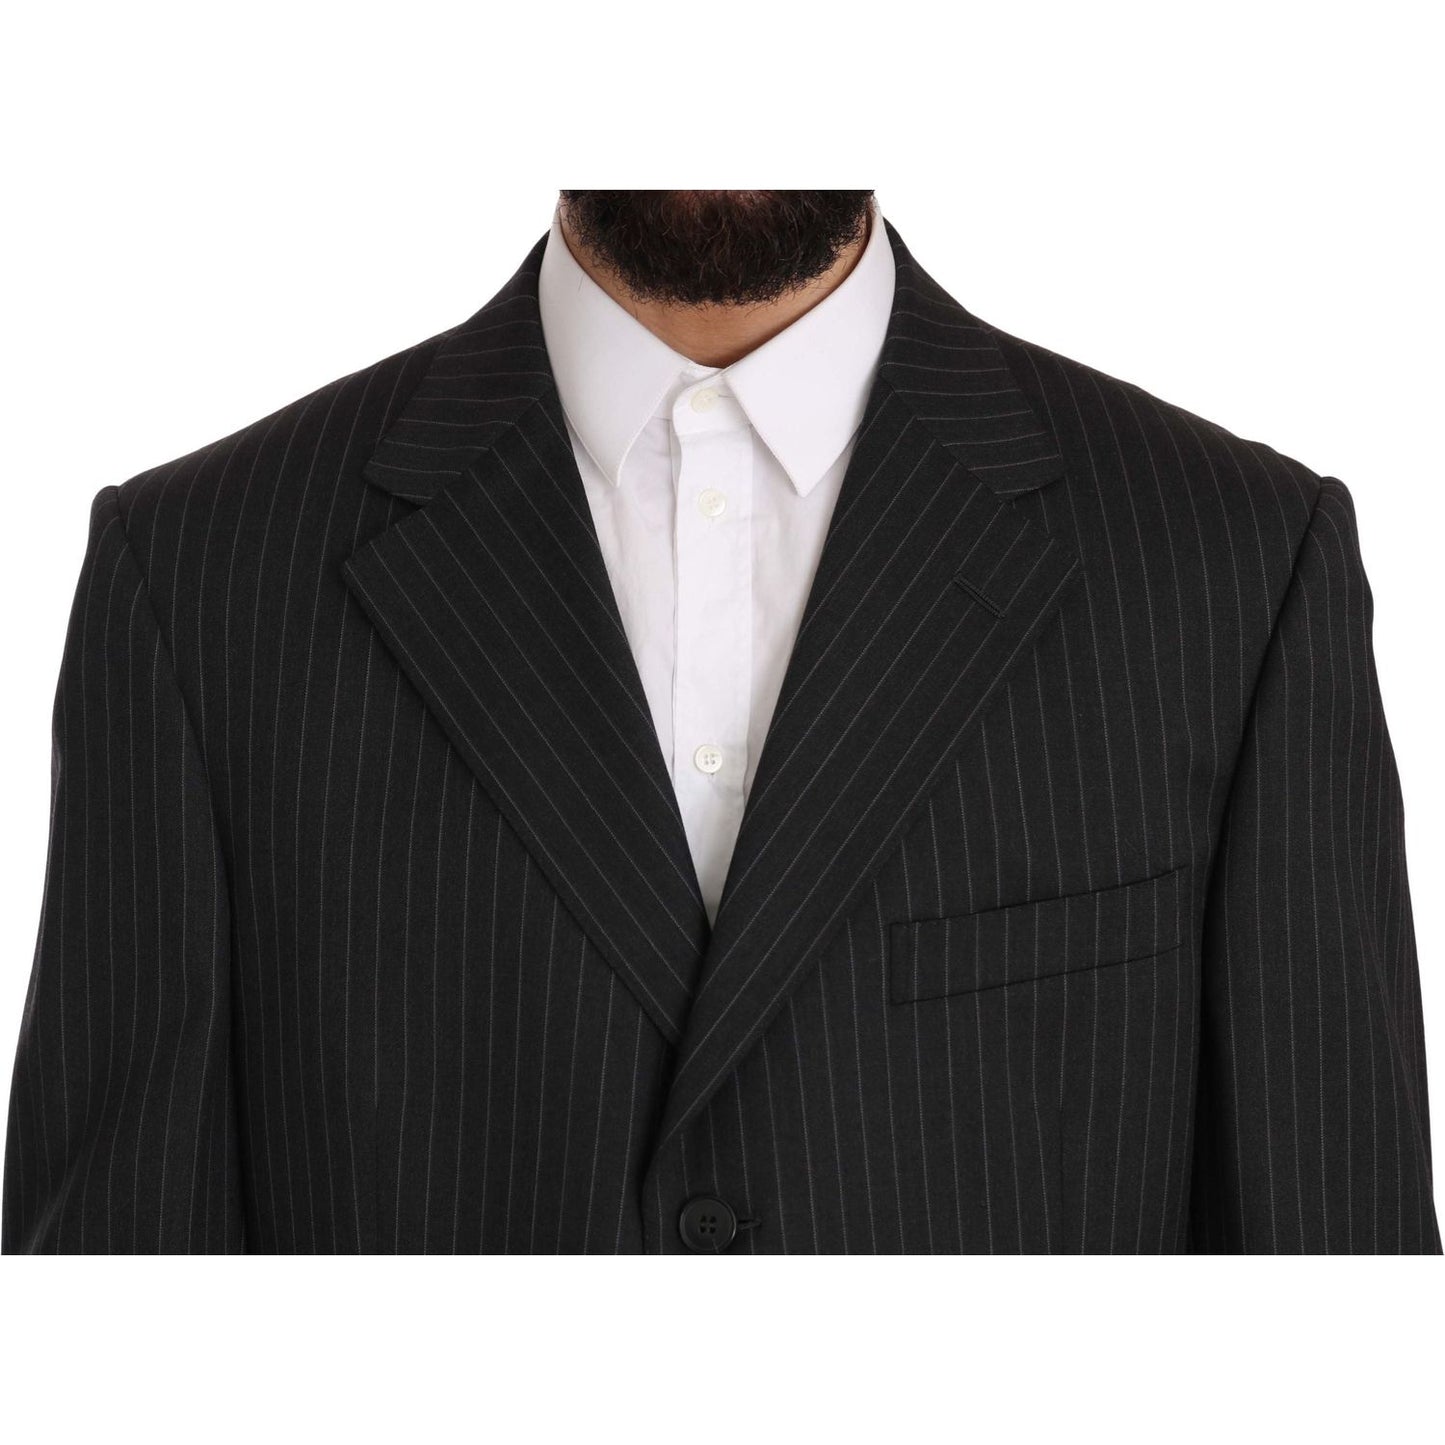 Z ZEGNA Elegant Black Striped Wool Suit black-striped-two-piece-3-button-100-wool-suit Suit IMG_7799-scaled.jpg